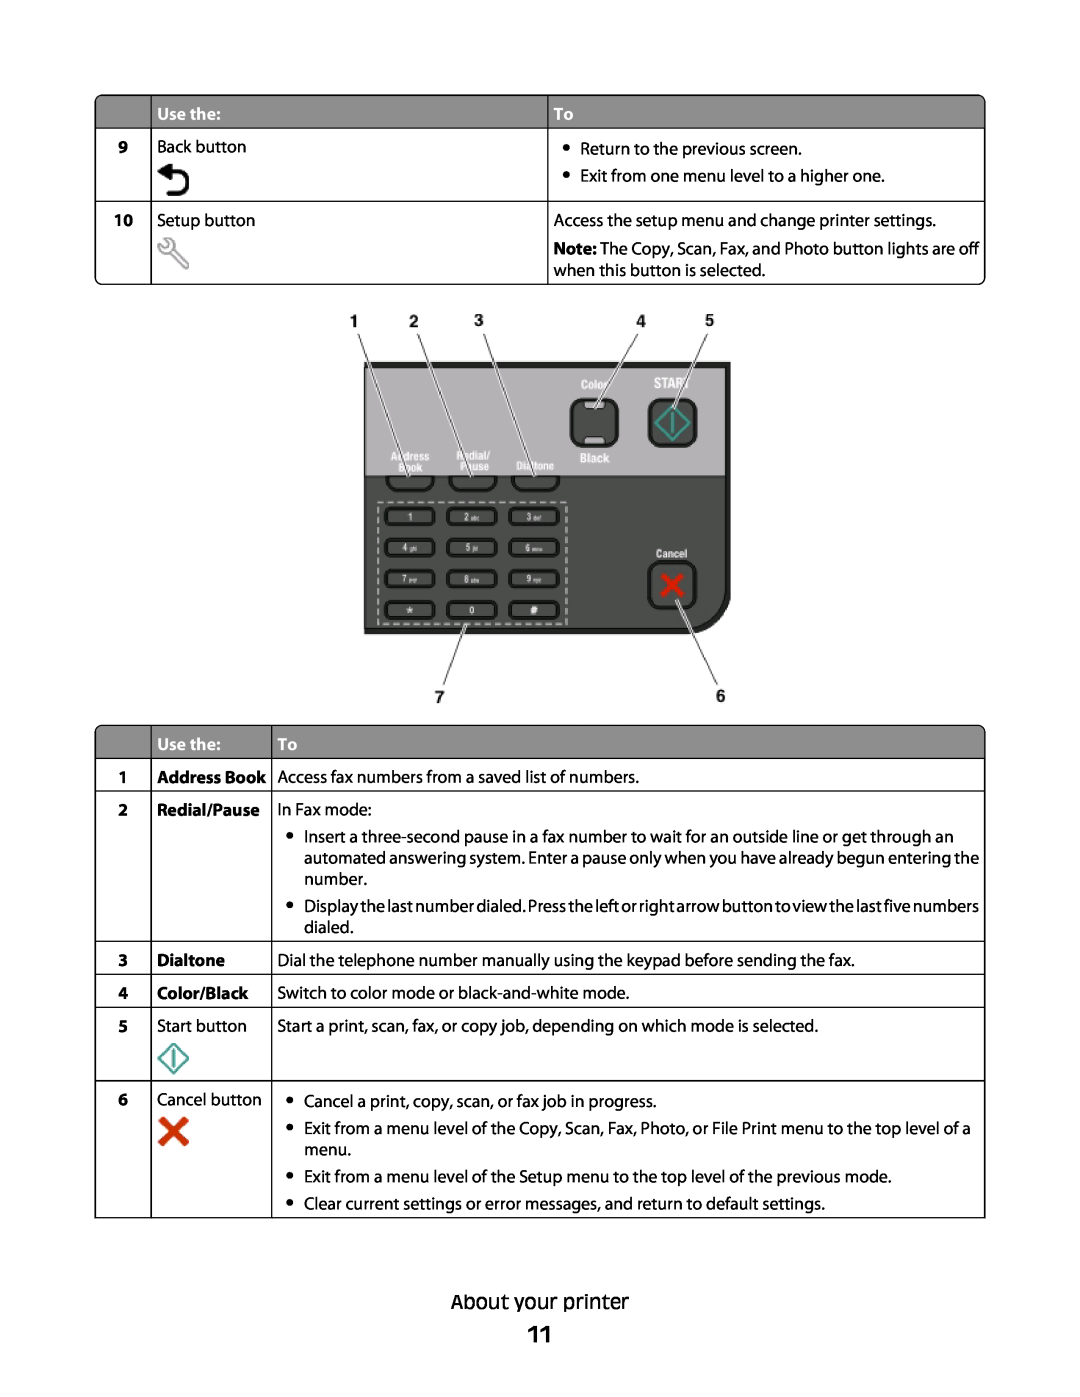 Lexmark S400 Use the, Access fax numbers from a saved list of numbers, Redial/Pause, In Fax mode, Dialtone, Color/Black 